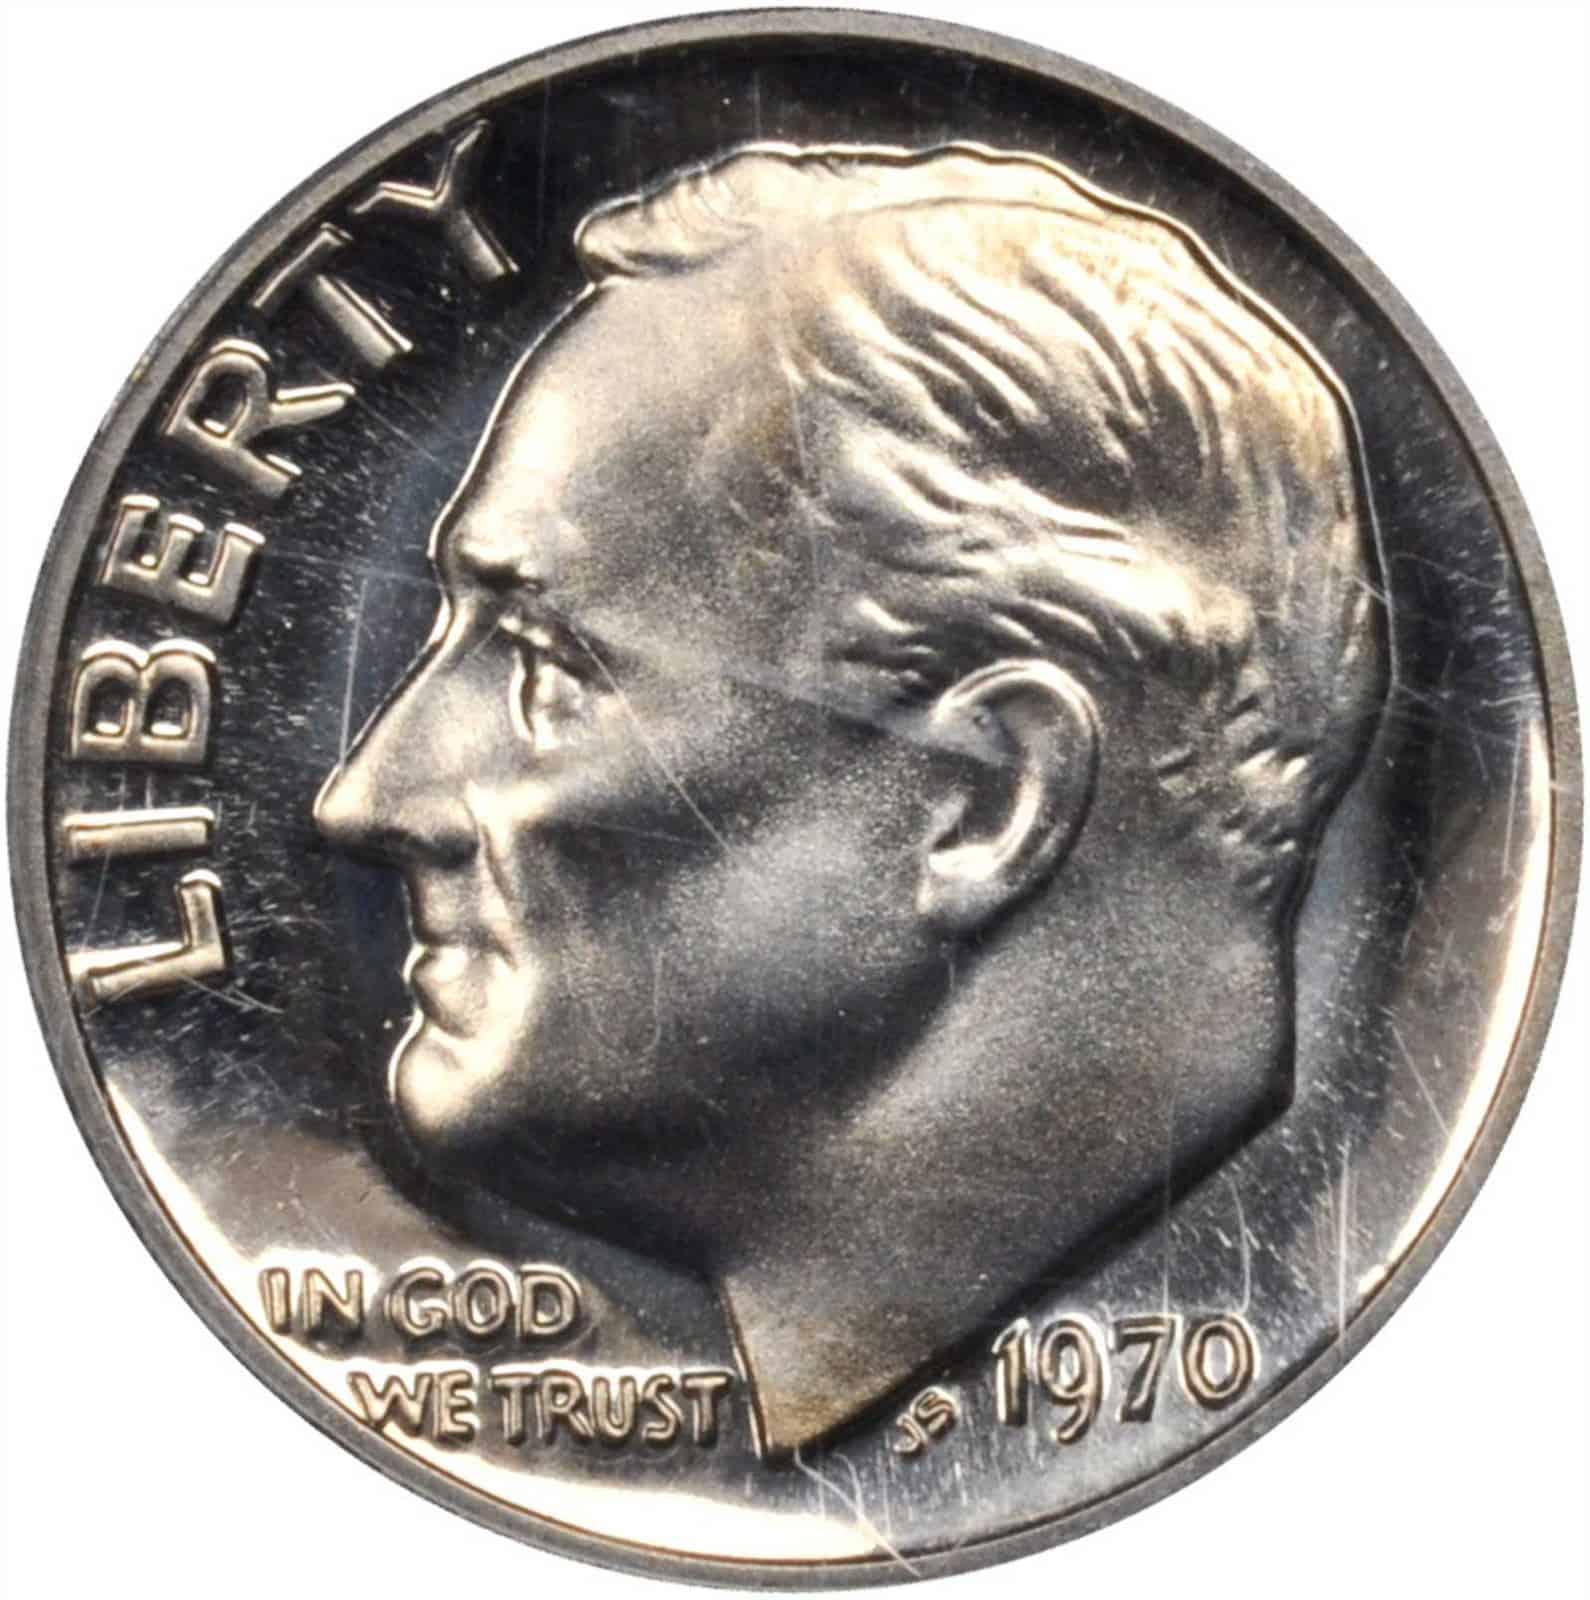 The obverse of the 1970 Roosevelt dime